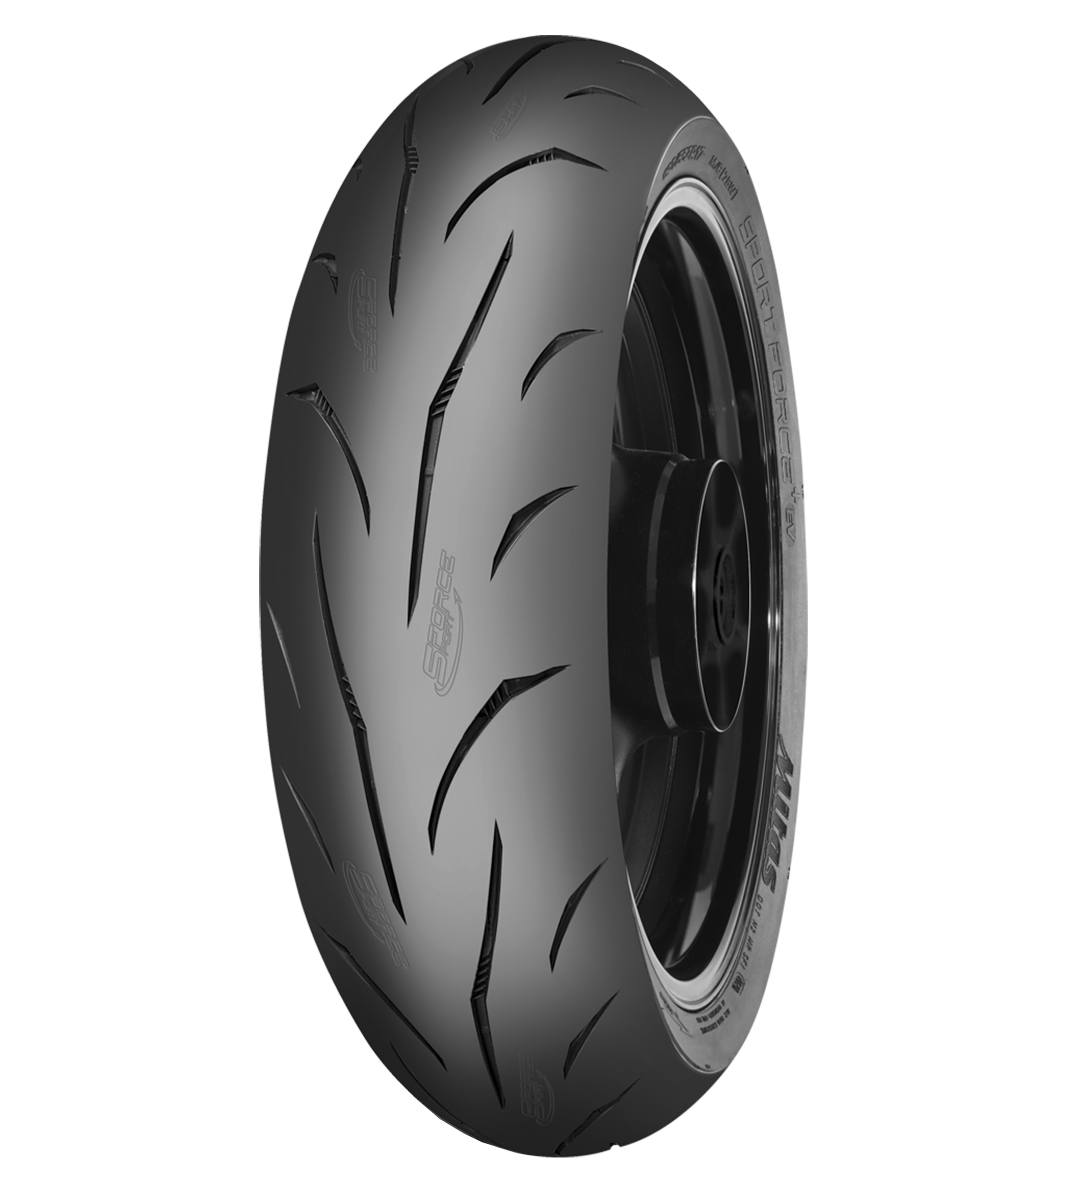 Mitas SPORT FORCE+ EV 190/55ZR17 Motorcycle Sport On-Road EVOLUTION (75W) No Stripe Tubeless Rear Tire, 603830, 190/55ZR17, Motorcycle Sport, On-Road, Rear, Sport, Sport Force+ EV, Sport Touring, Tires - Imported and distributed in North &amp; South America by Lindeco Genuine Powersports - Premier Powersports Equipment and Accessories for Motorcycle Enthusiasts, Professional Riders and Dealers.